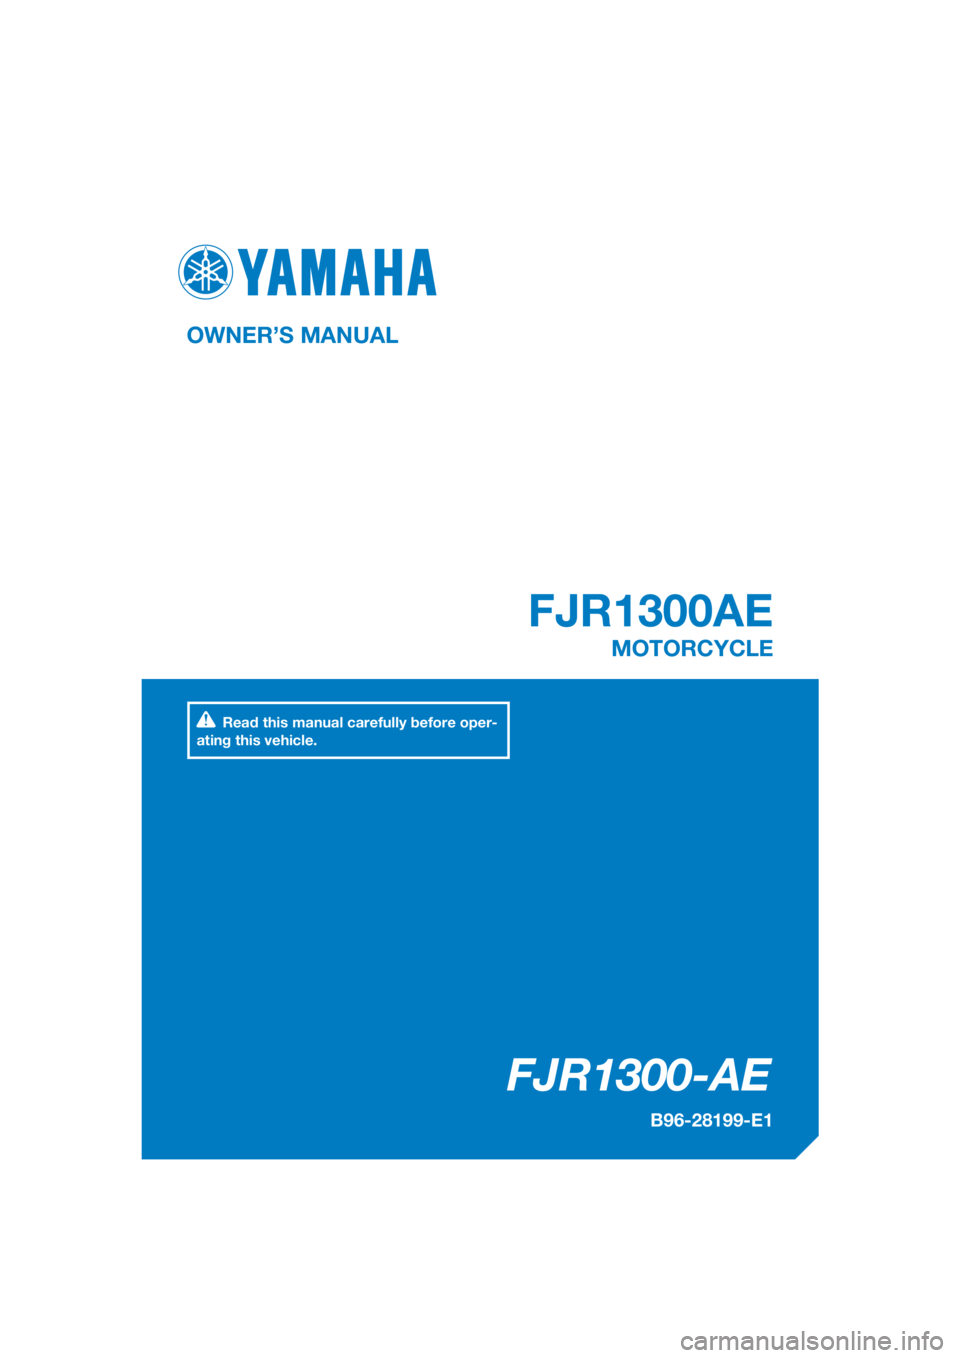 YAMAHA FJR1300AE 2018  Owners Manual DIC183
FJR1300-AE
FJR1300AE
OWNER’S MANUAL
B96-28199-E1
MOTORCYCLE
[English  (E)]
Read this manual carefully before oper-
ating this vehicle. 